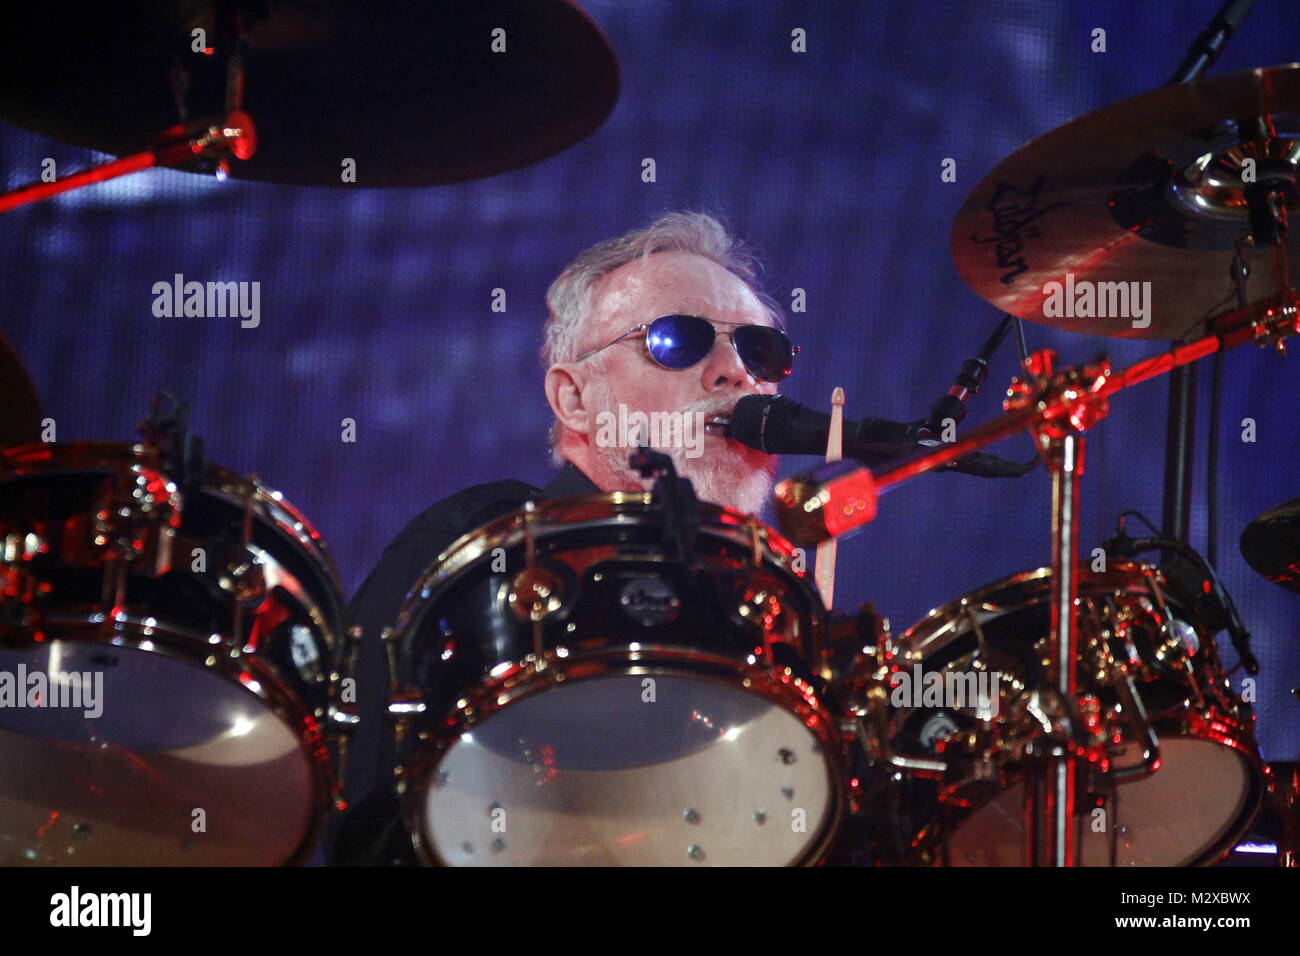 Frankfurt, Germany. 7th Feb, 2015. Queen + Adam Lambert, collaboration between the active members of the British rock band Queen (Brian May and Roger Taylor) and American vocalist Adam Lambert. Concert at Festhalle Frankfurt, Germany. Here:Roger Taylor (drums). Credit: Christian Lademann Stock Photo